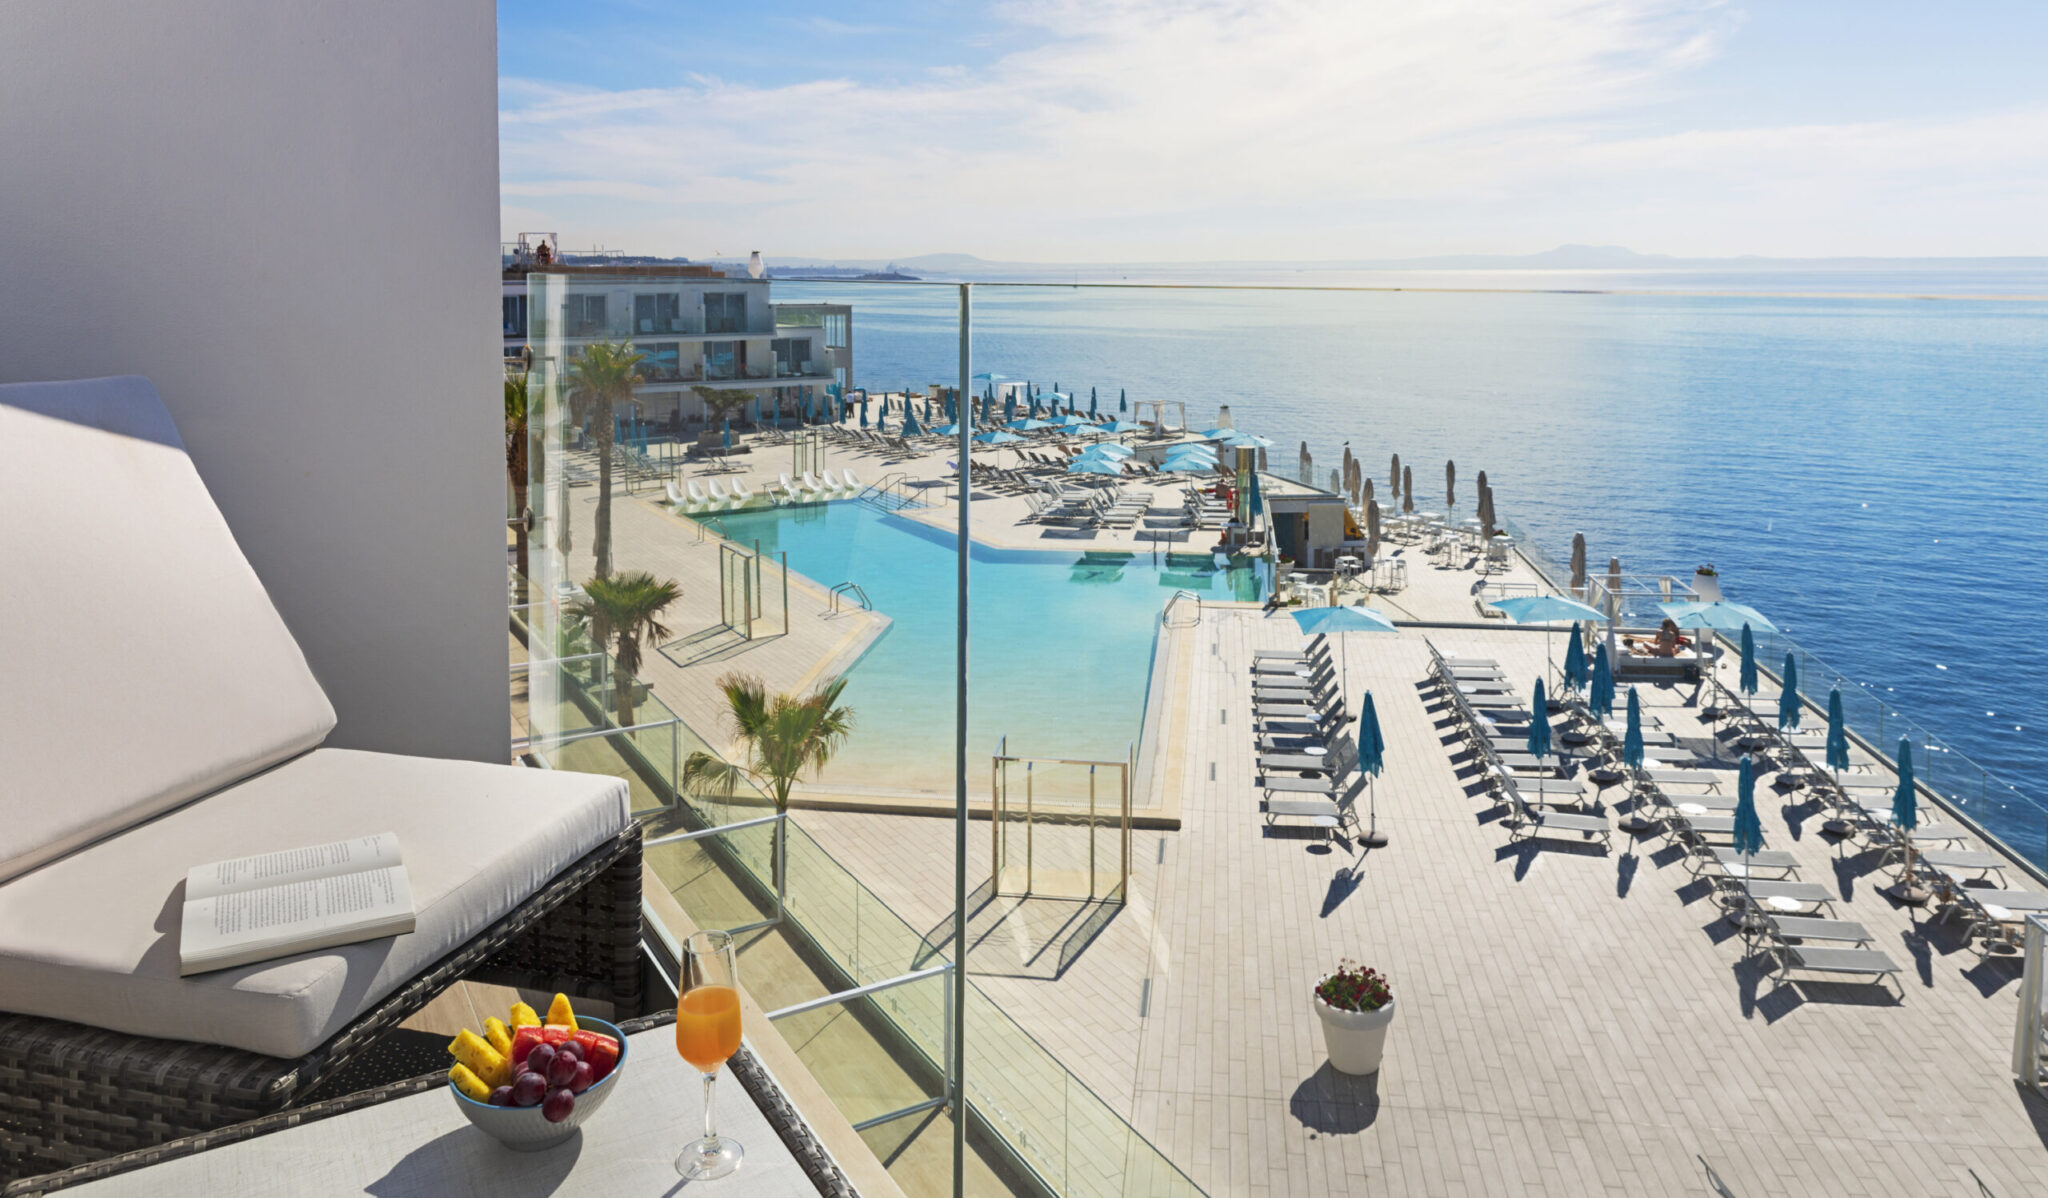 Take in the stunning panoramic views of the ocean from your rooms spacious terrace area, whilst on your next golf break to Elba Sunet Mallorca Hotel.